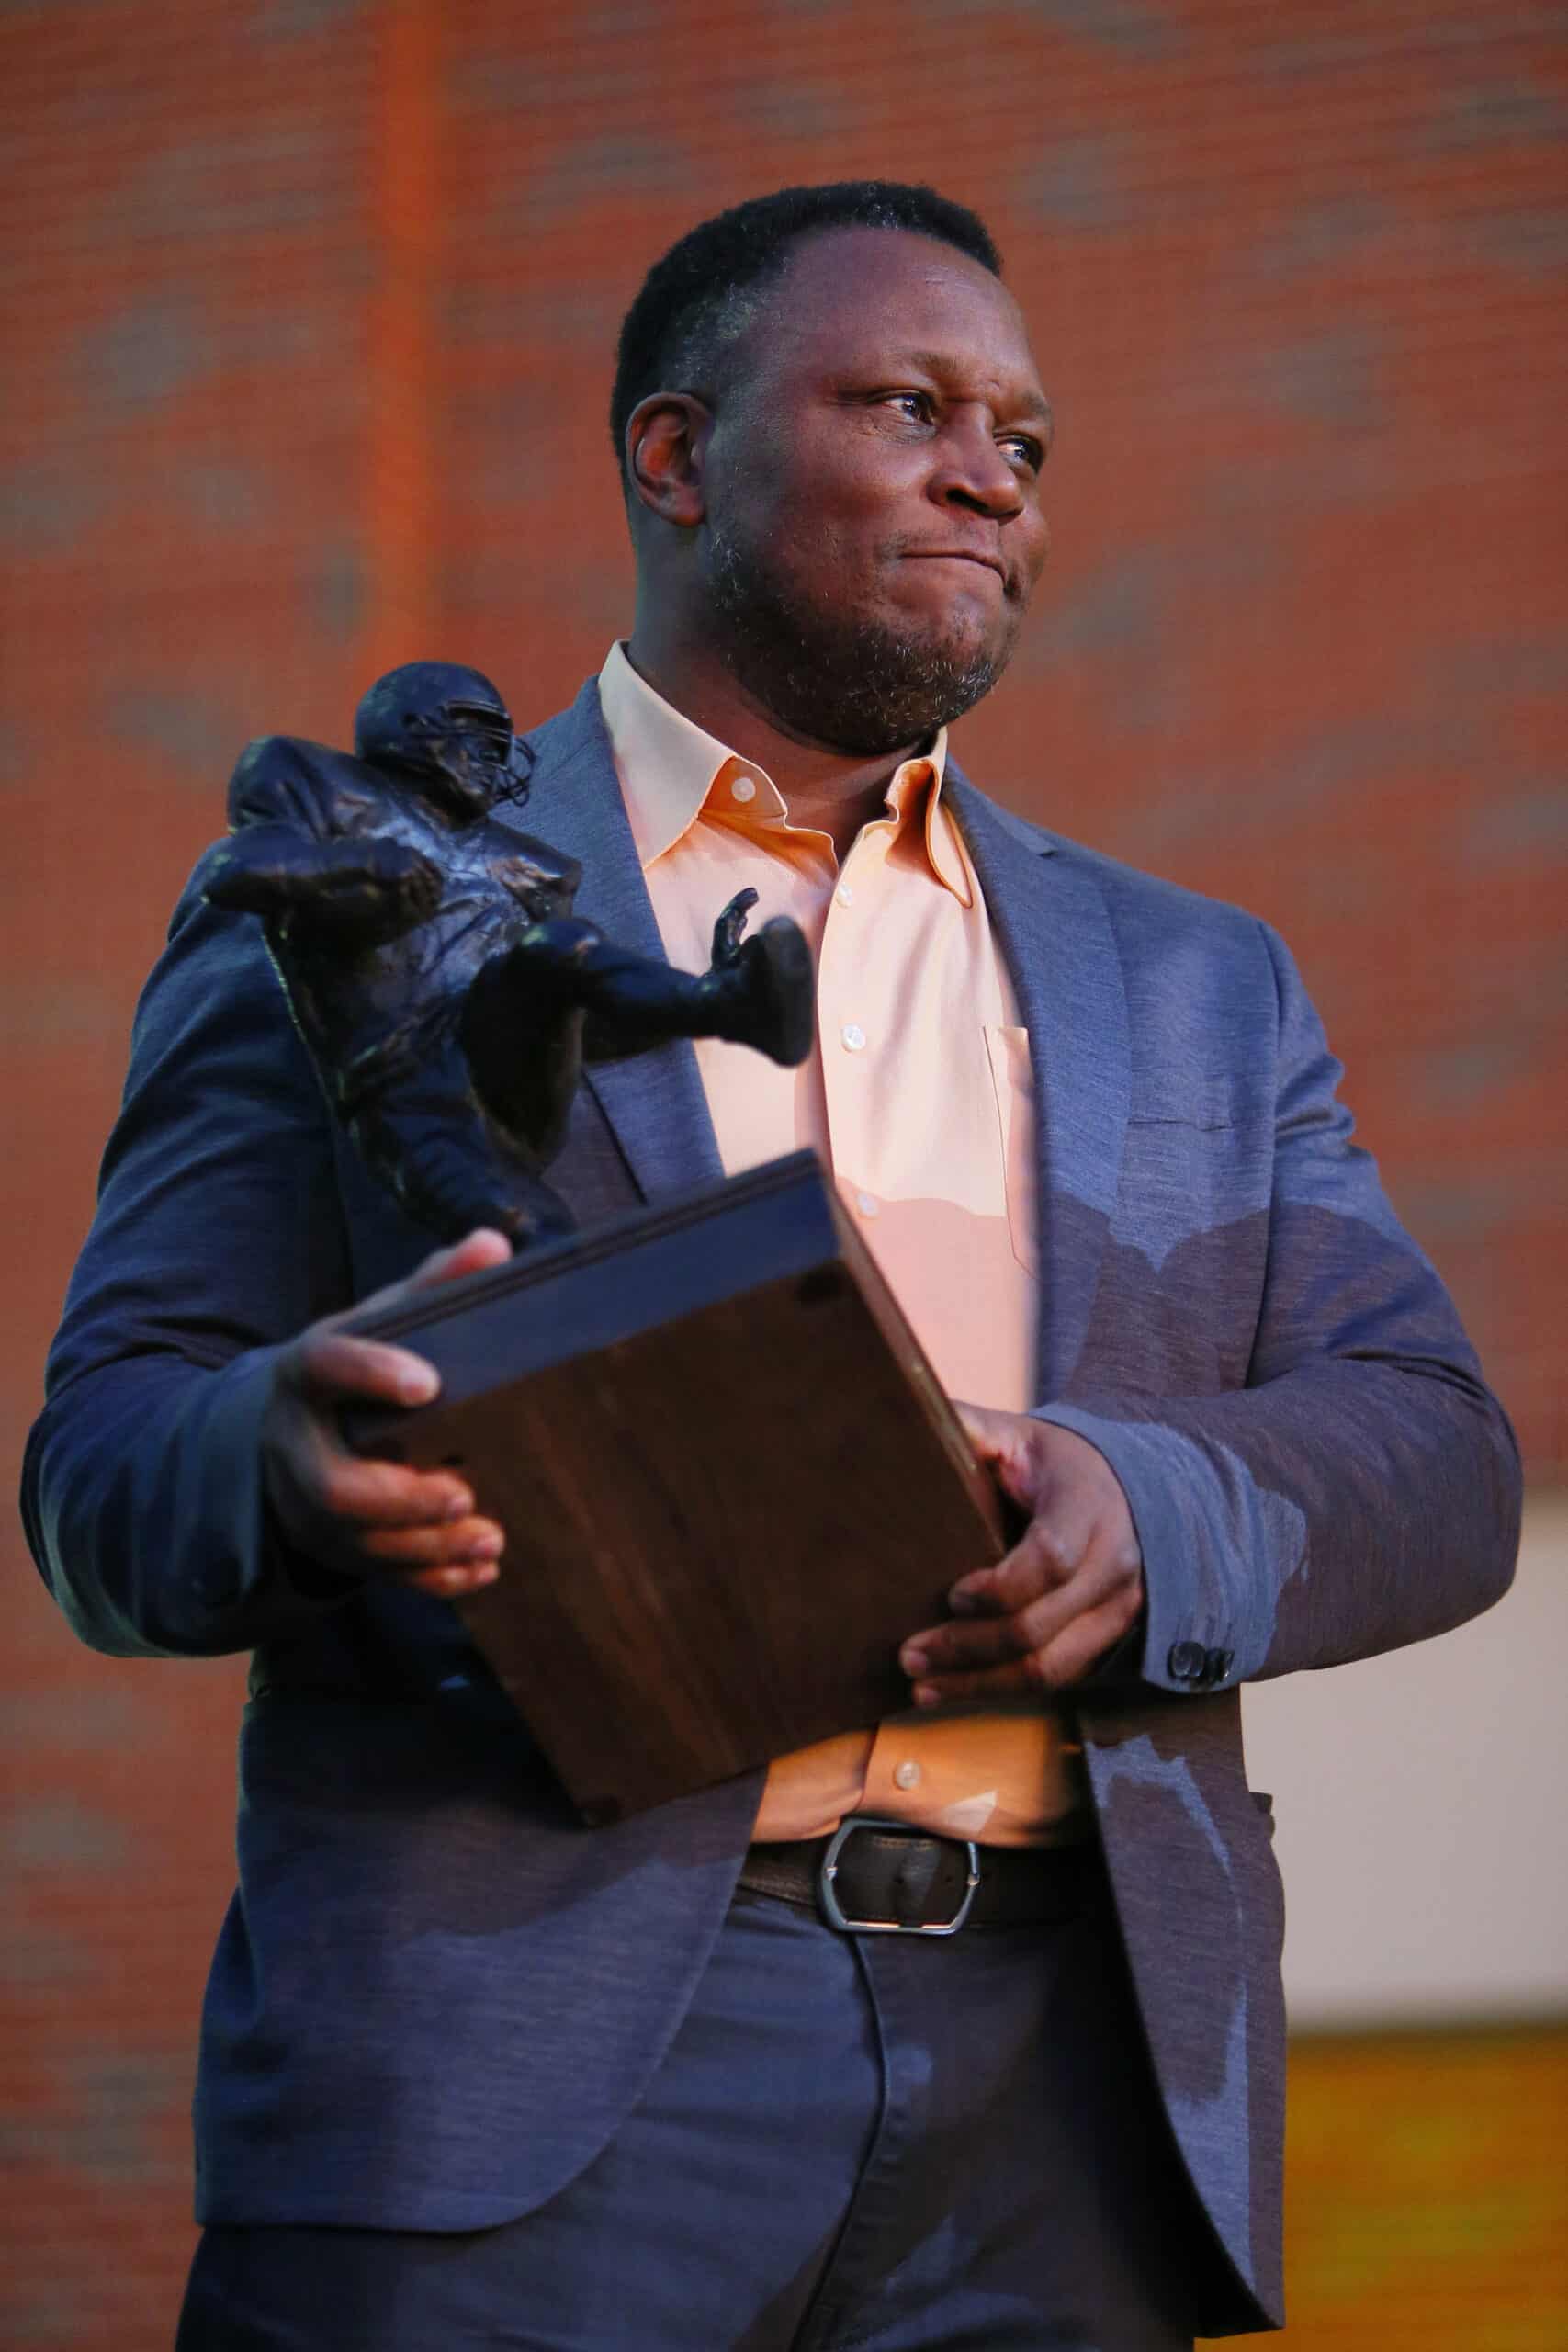 STILLWATER, OK - NOVEMBER 13: Barry Sanders acknowledges fans after a statue was unveiled in his honor by the Oklahoma State Cowboys at Boone Pickens Stadium on November 13, 2021 in Stillwater, Oklahoma. Sanders is holding a miniature version of the statue. (Photo by Brian Bahr/Getty Images)